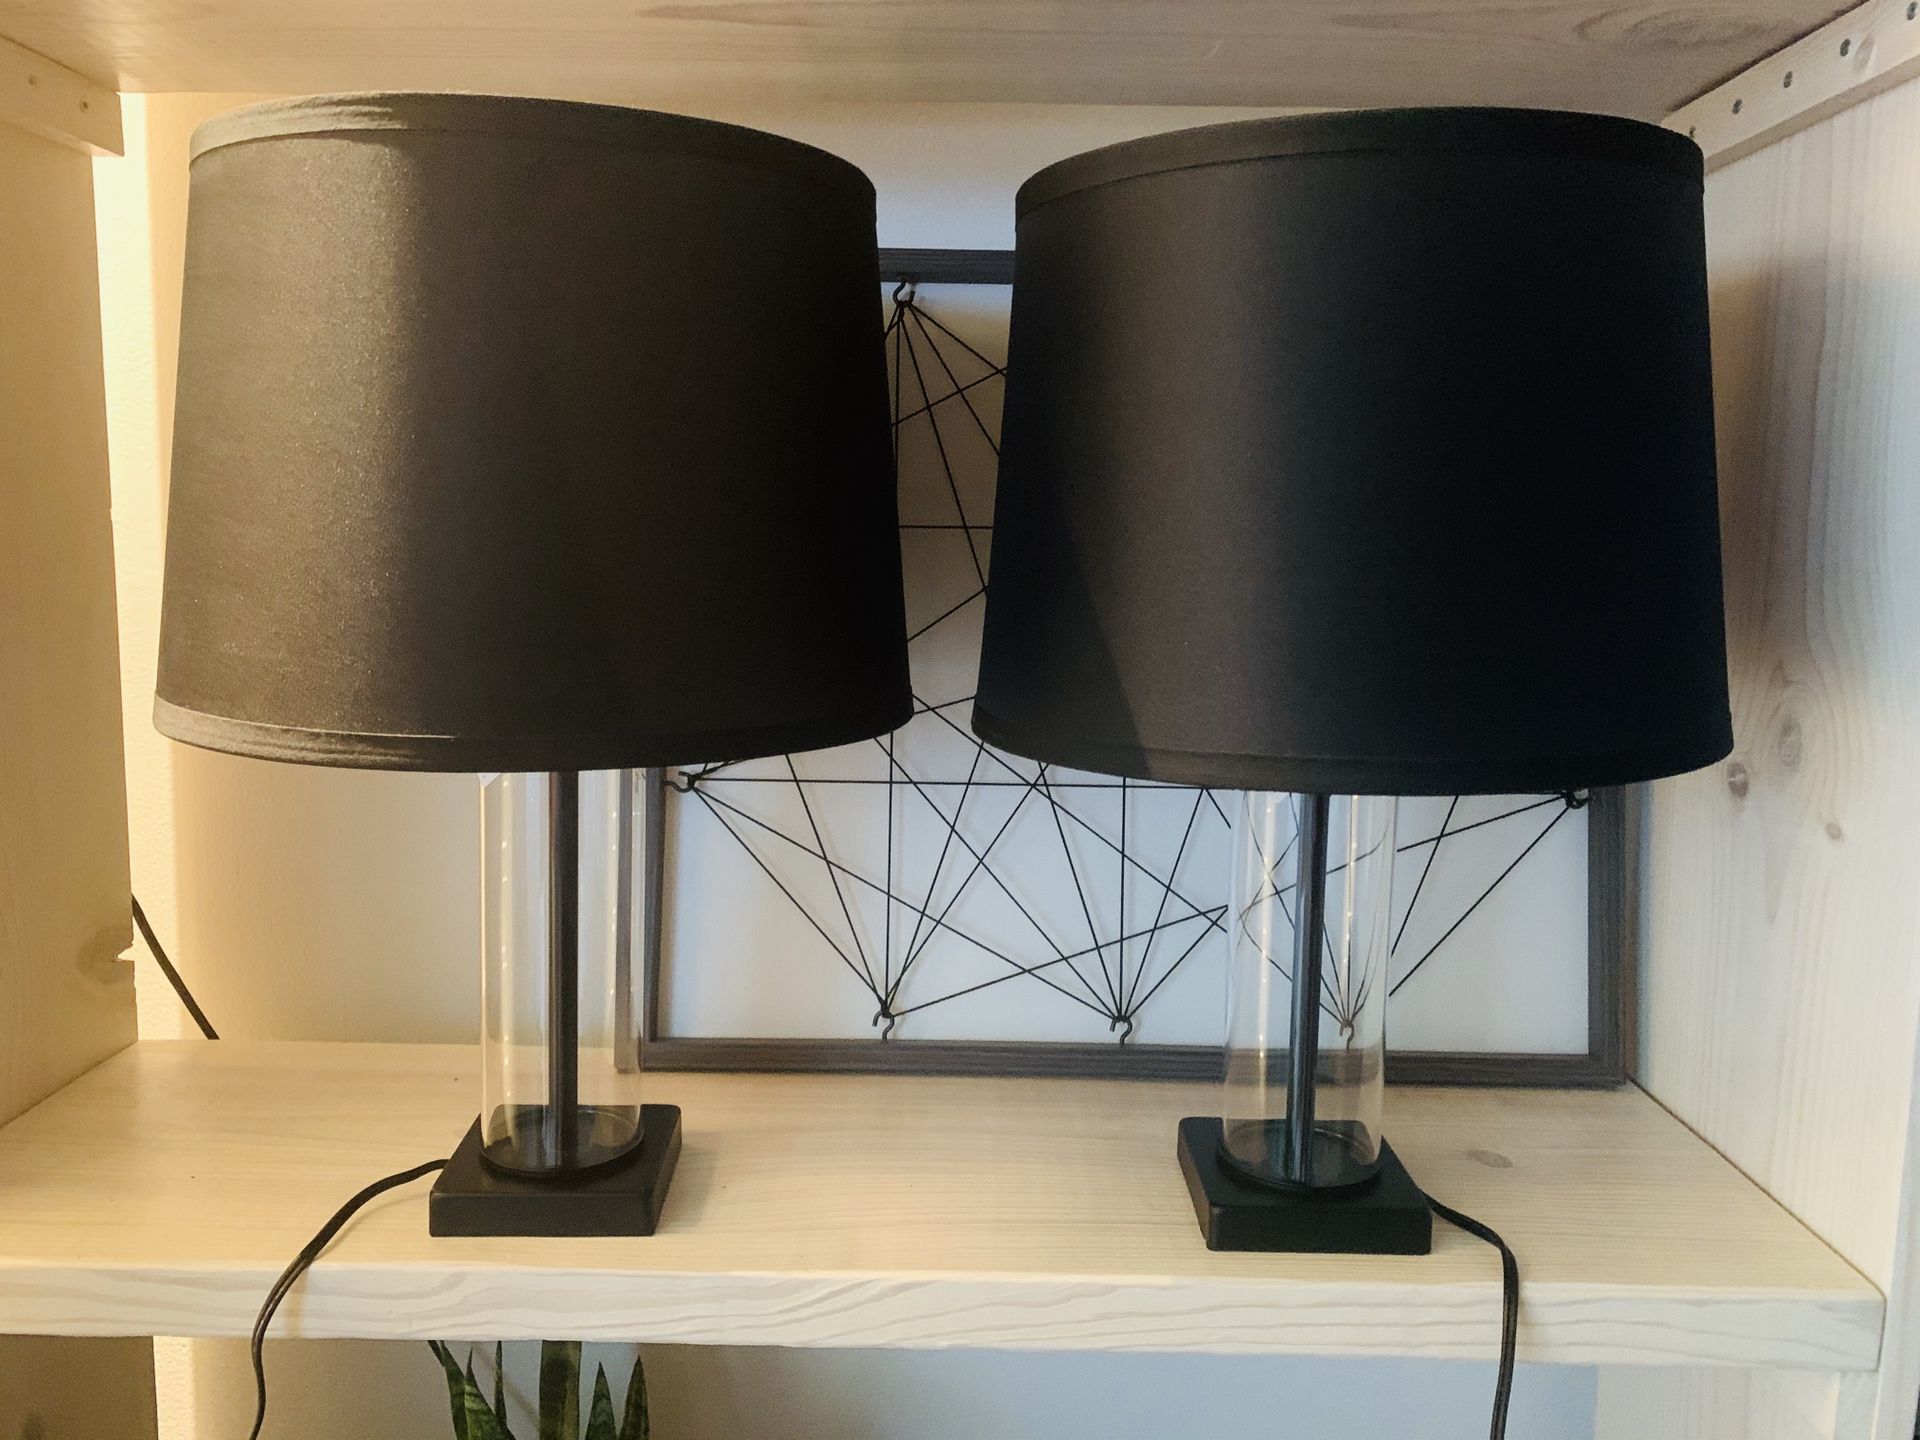 Lamps, price for both